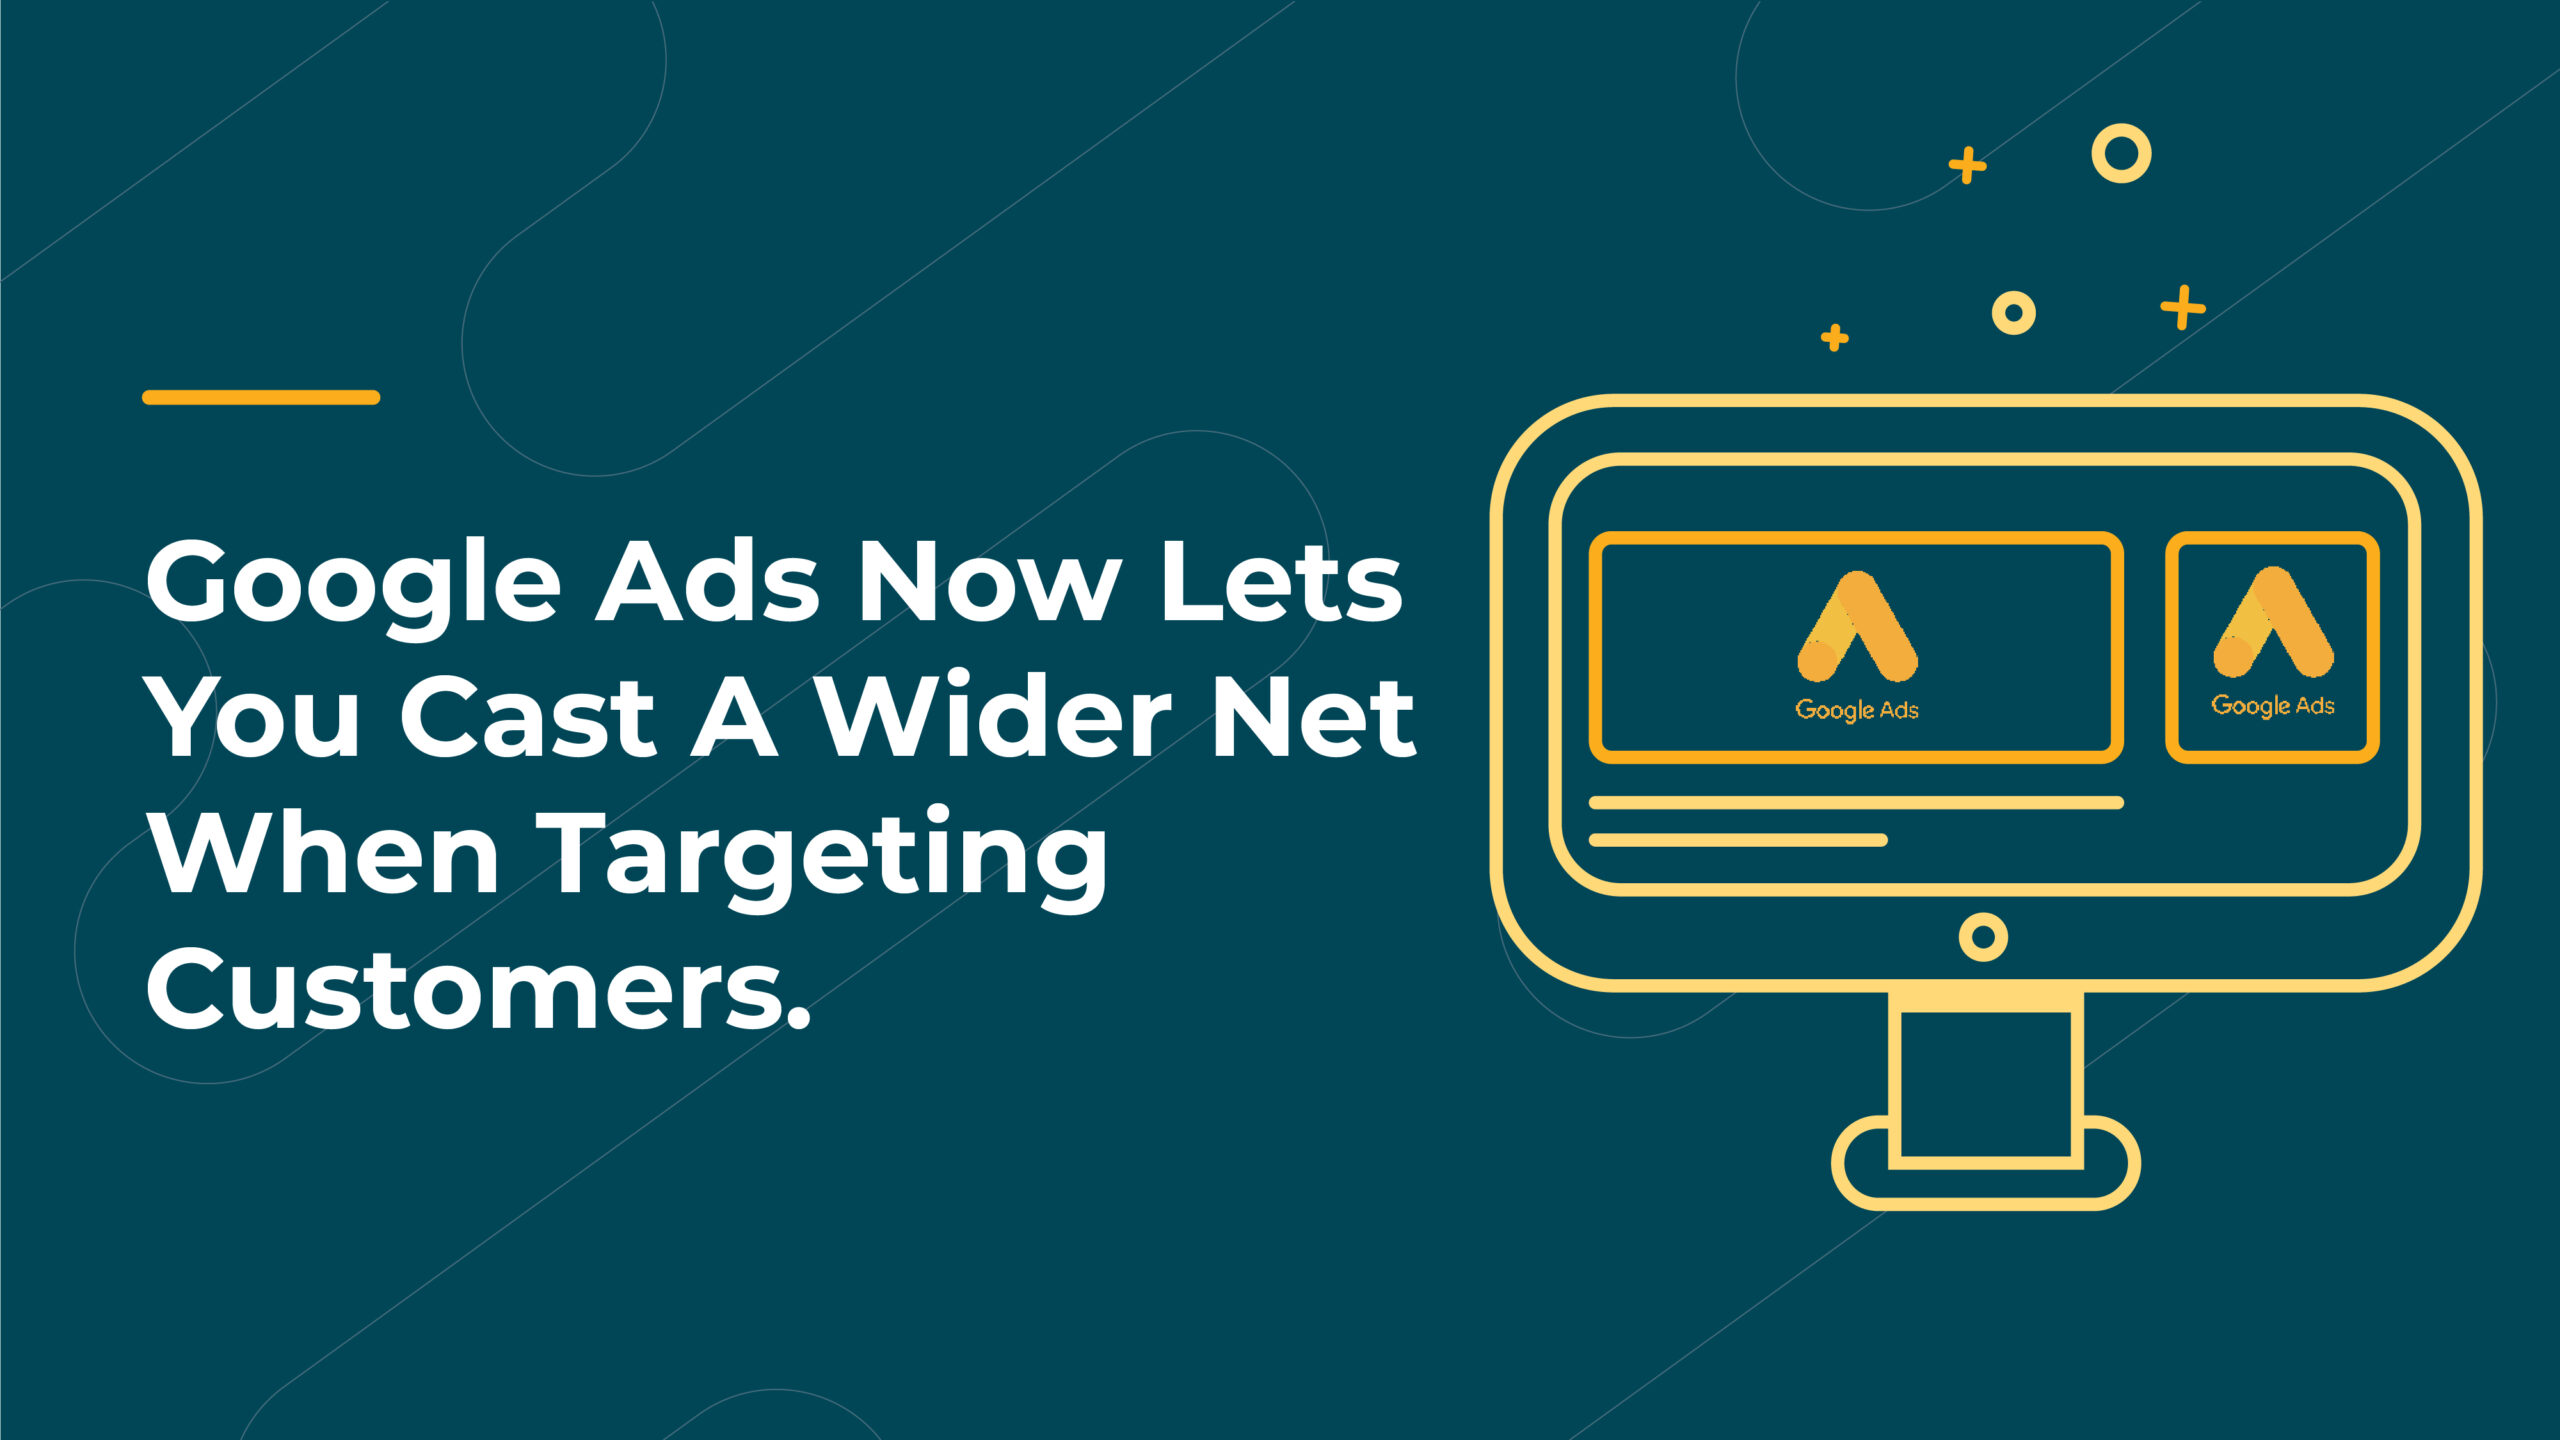 Google Ads Now Lets You Cast A Wider Net When Targeting Customers